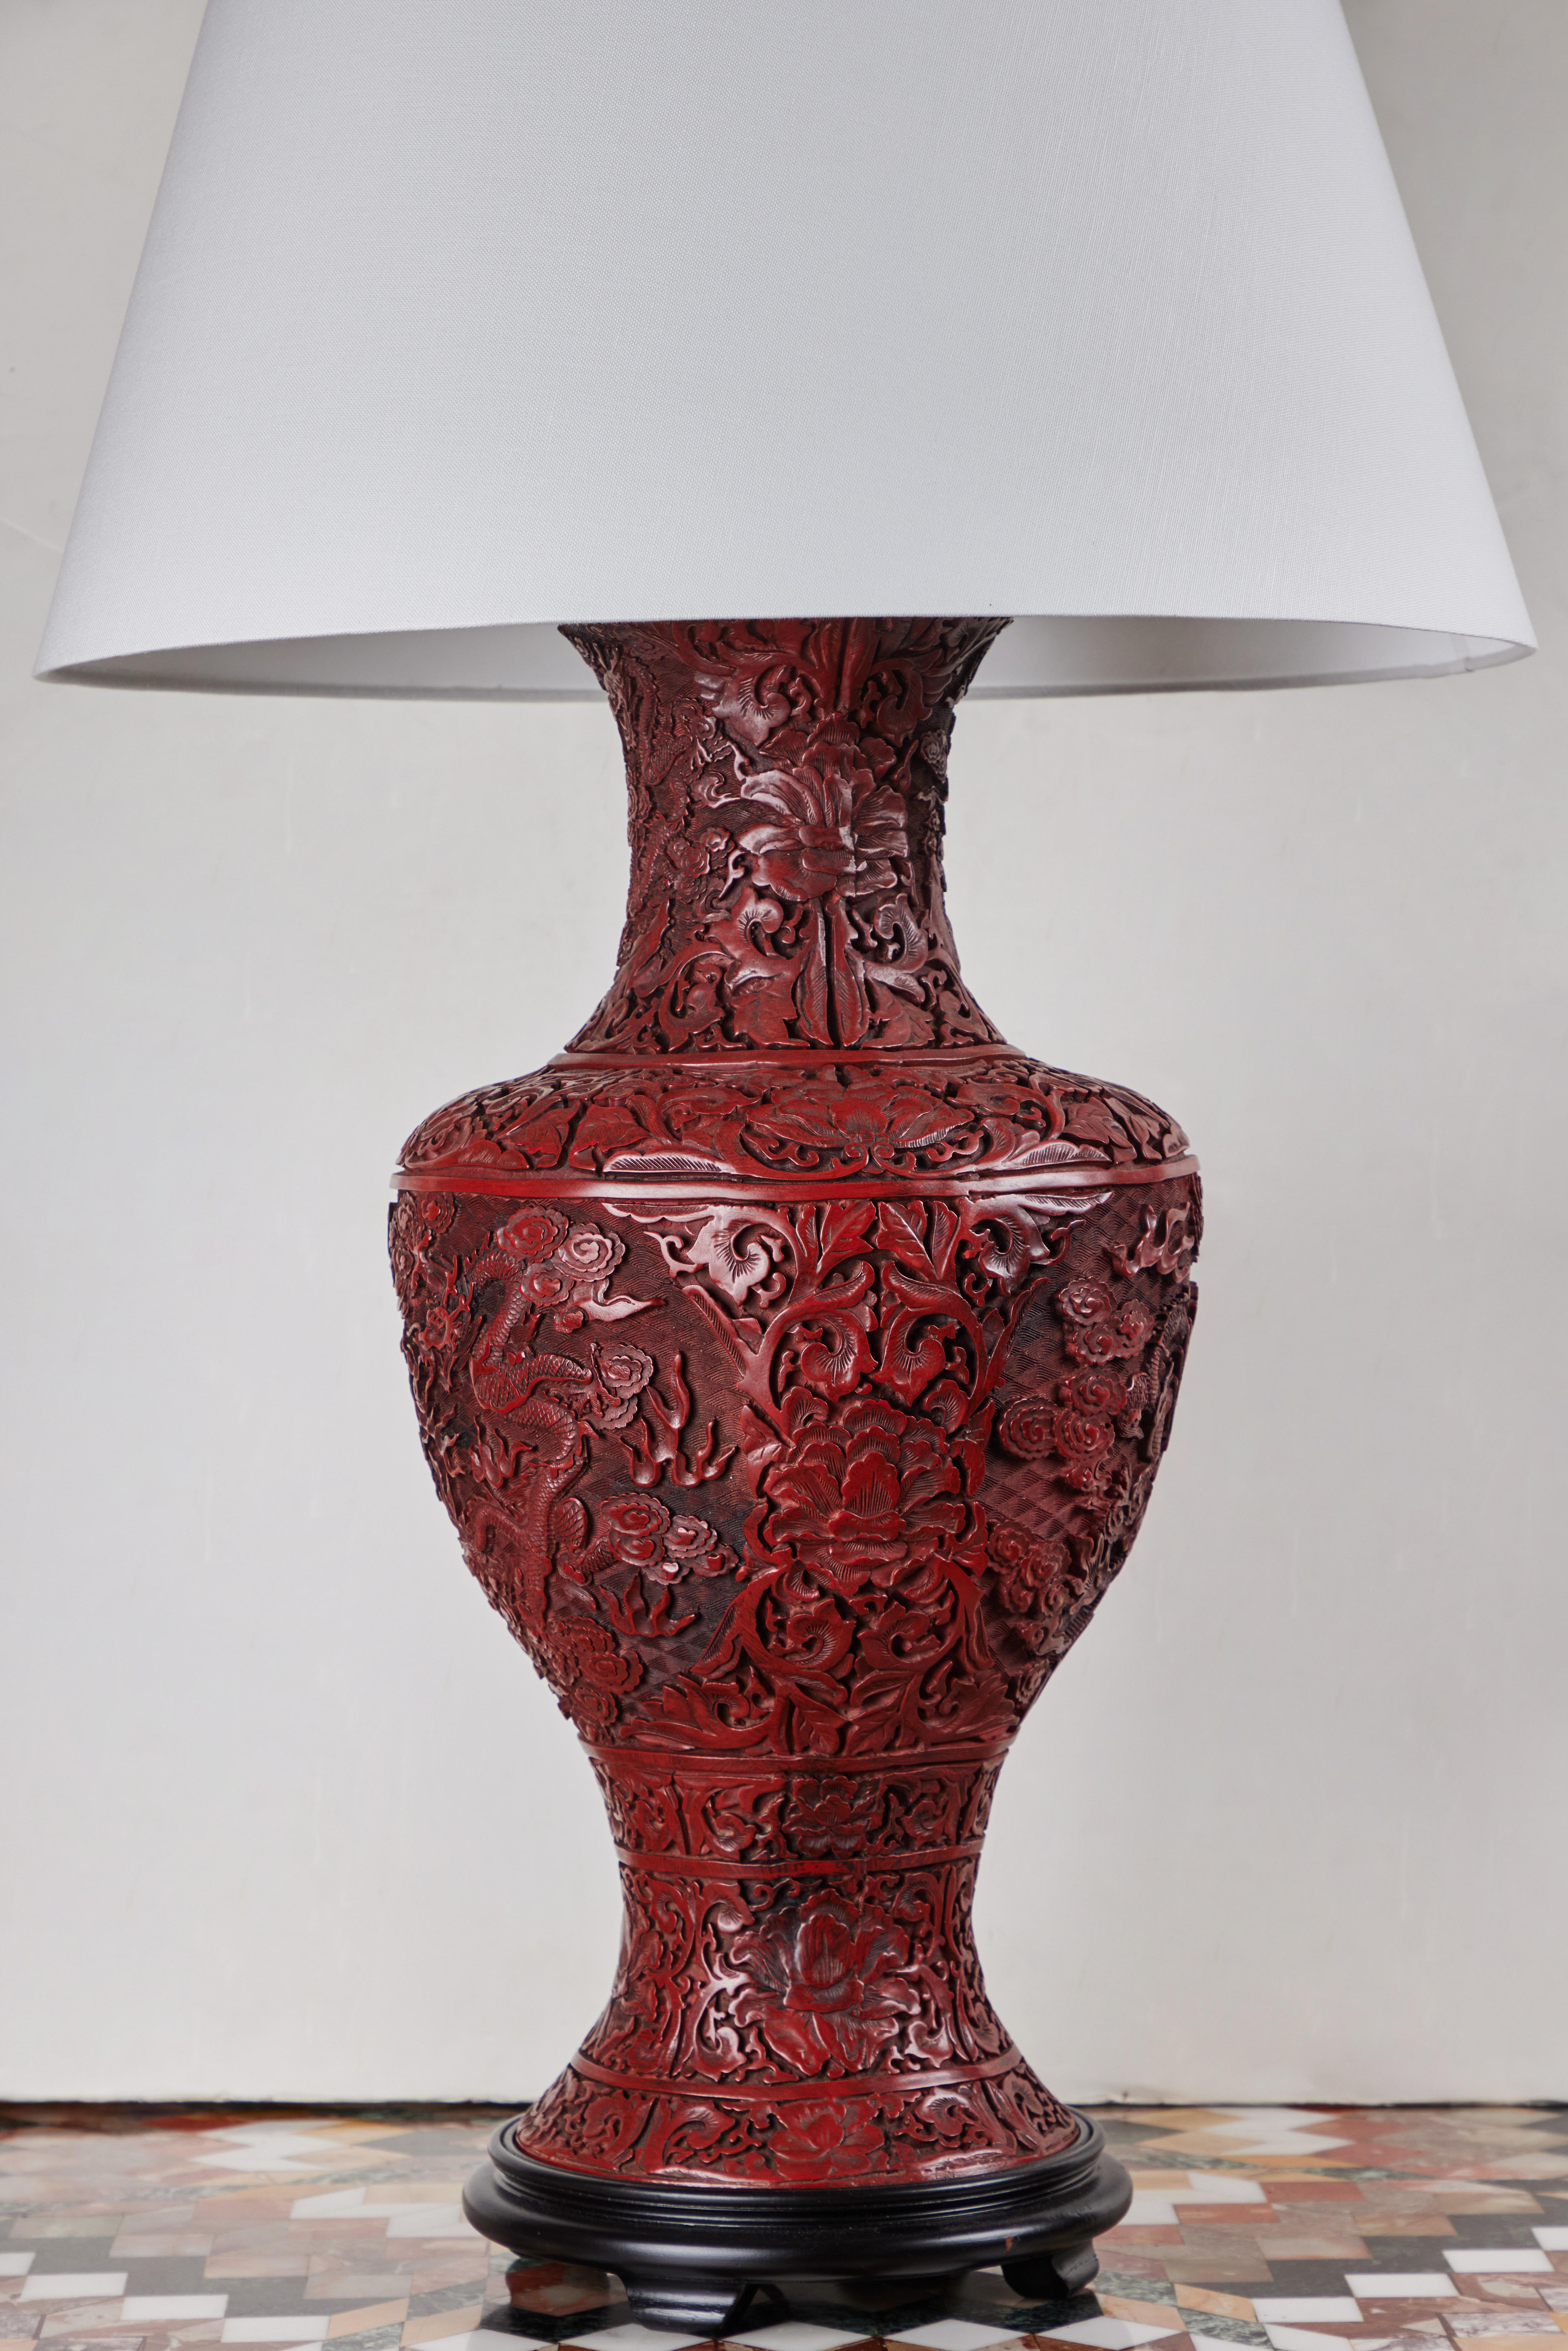 An elaborately carved pair of grand-scale, Chinese, Cinnabar vases turned to table lamps. Each fully decorated with chrysanthemum blossoms, foliate forms, and sinuous dragons among clouded skies.  Newly wired for U.S. current. Shade diameter: 21.75